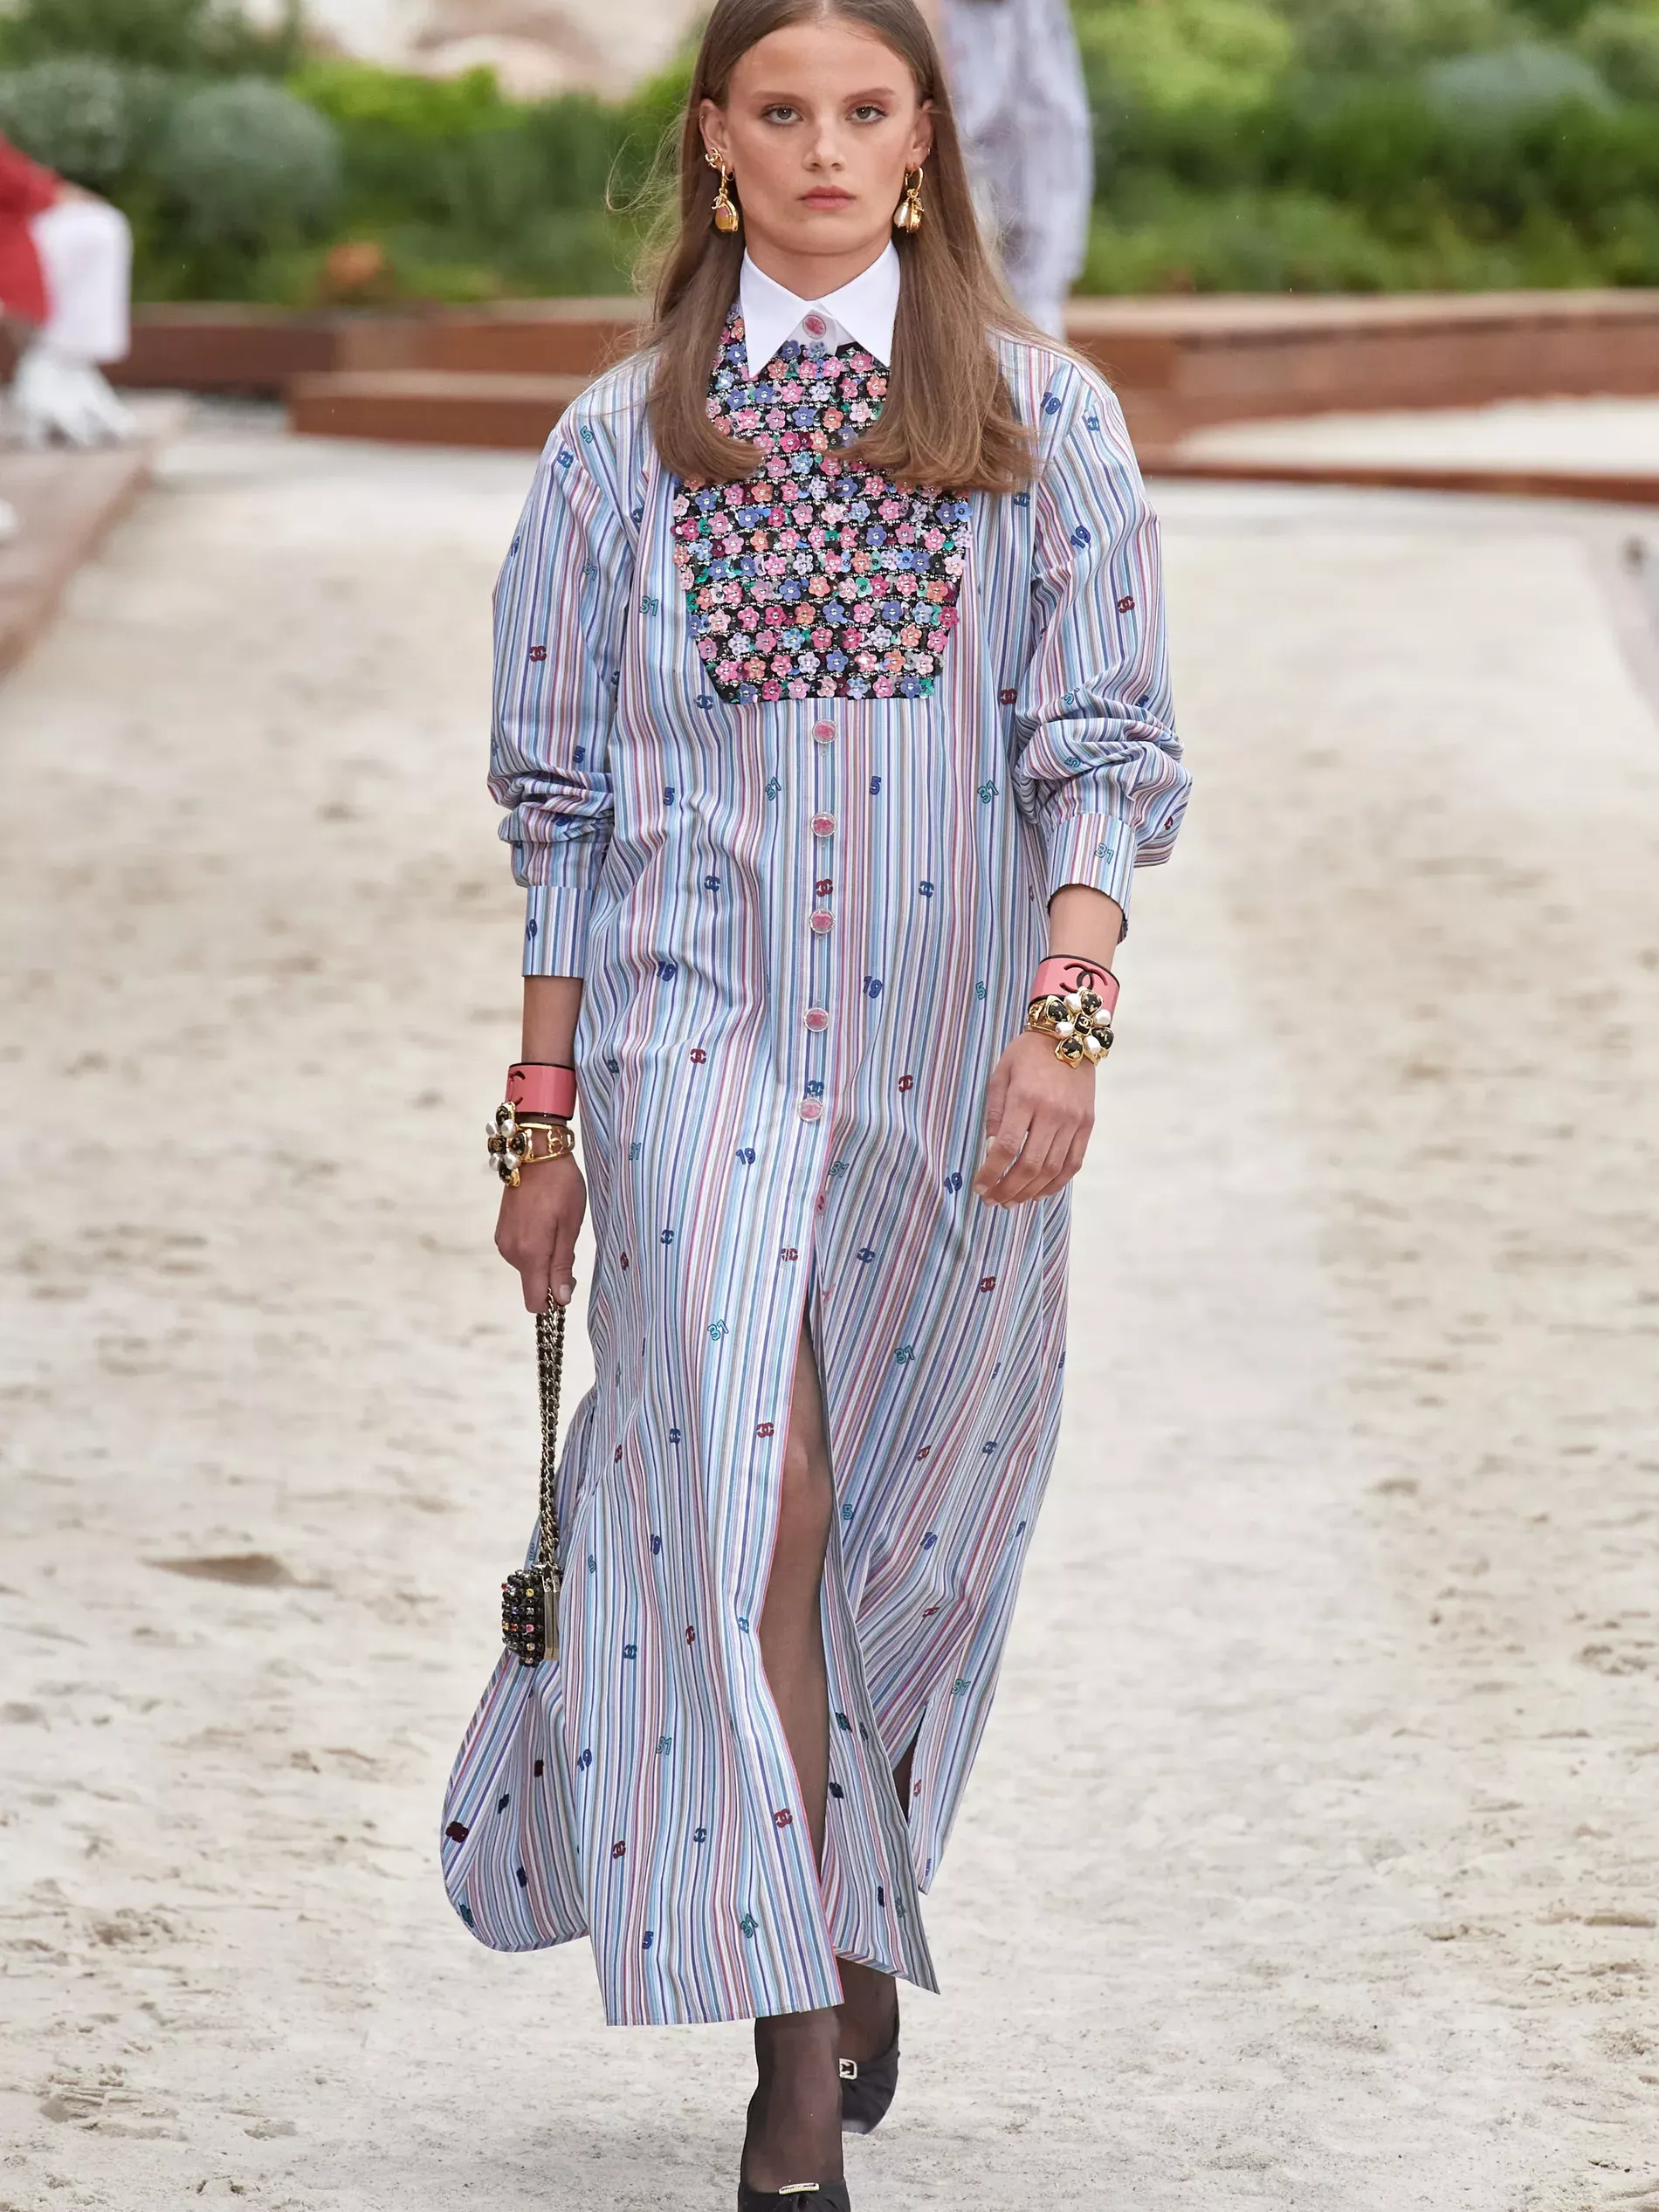 7 Chanel Cruise Outfits We Want To Wear Now